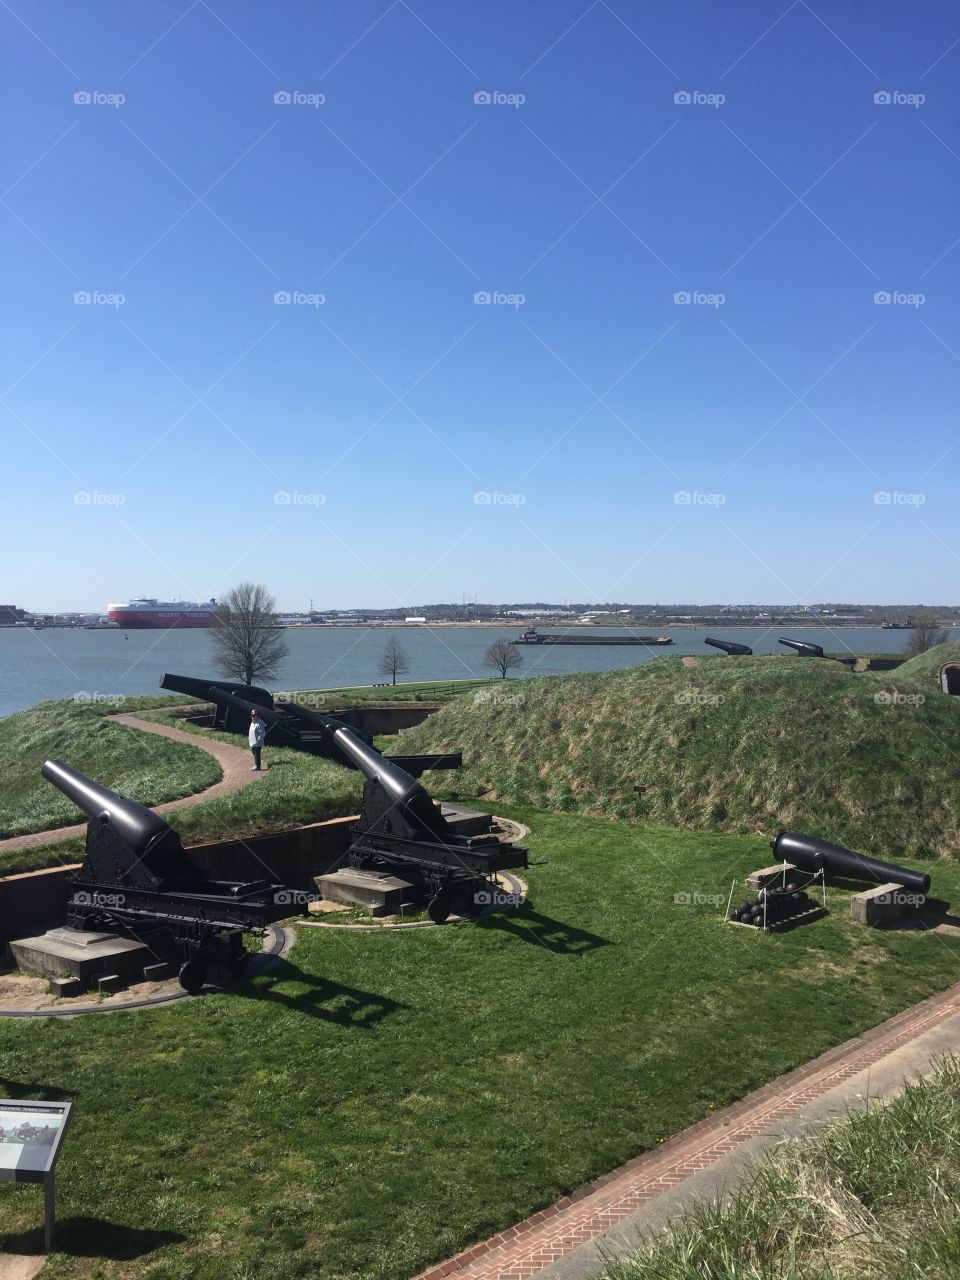 Ft McHenry